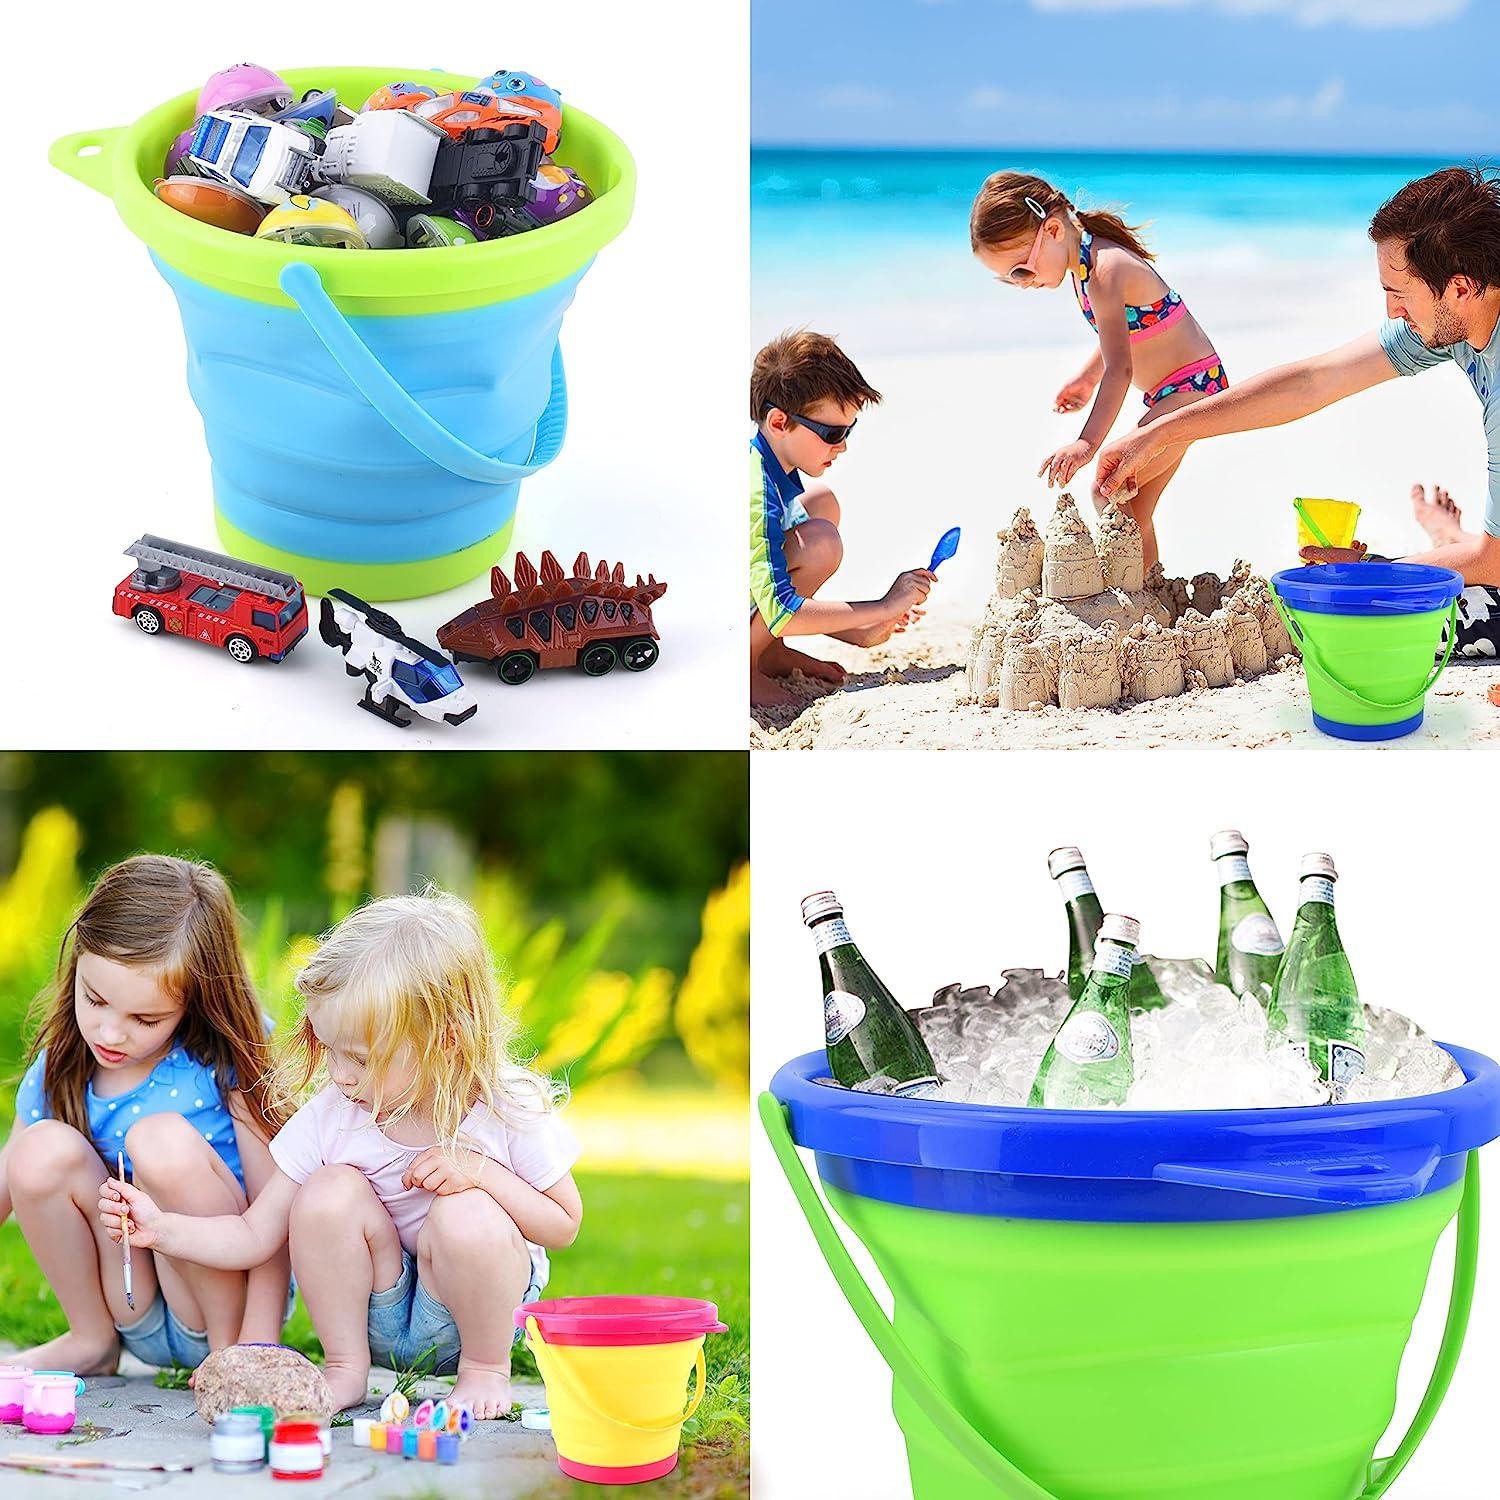 JOYIN 4 Collapsible Buckets & Basket for Kid, 2L Foldable Round Tub  Portable Pail for Summer Beach, Camping Gear Water, Fishing, and Fun Summer  Activities